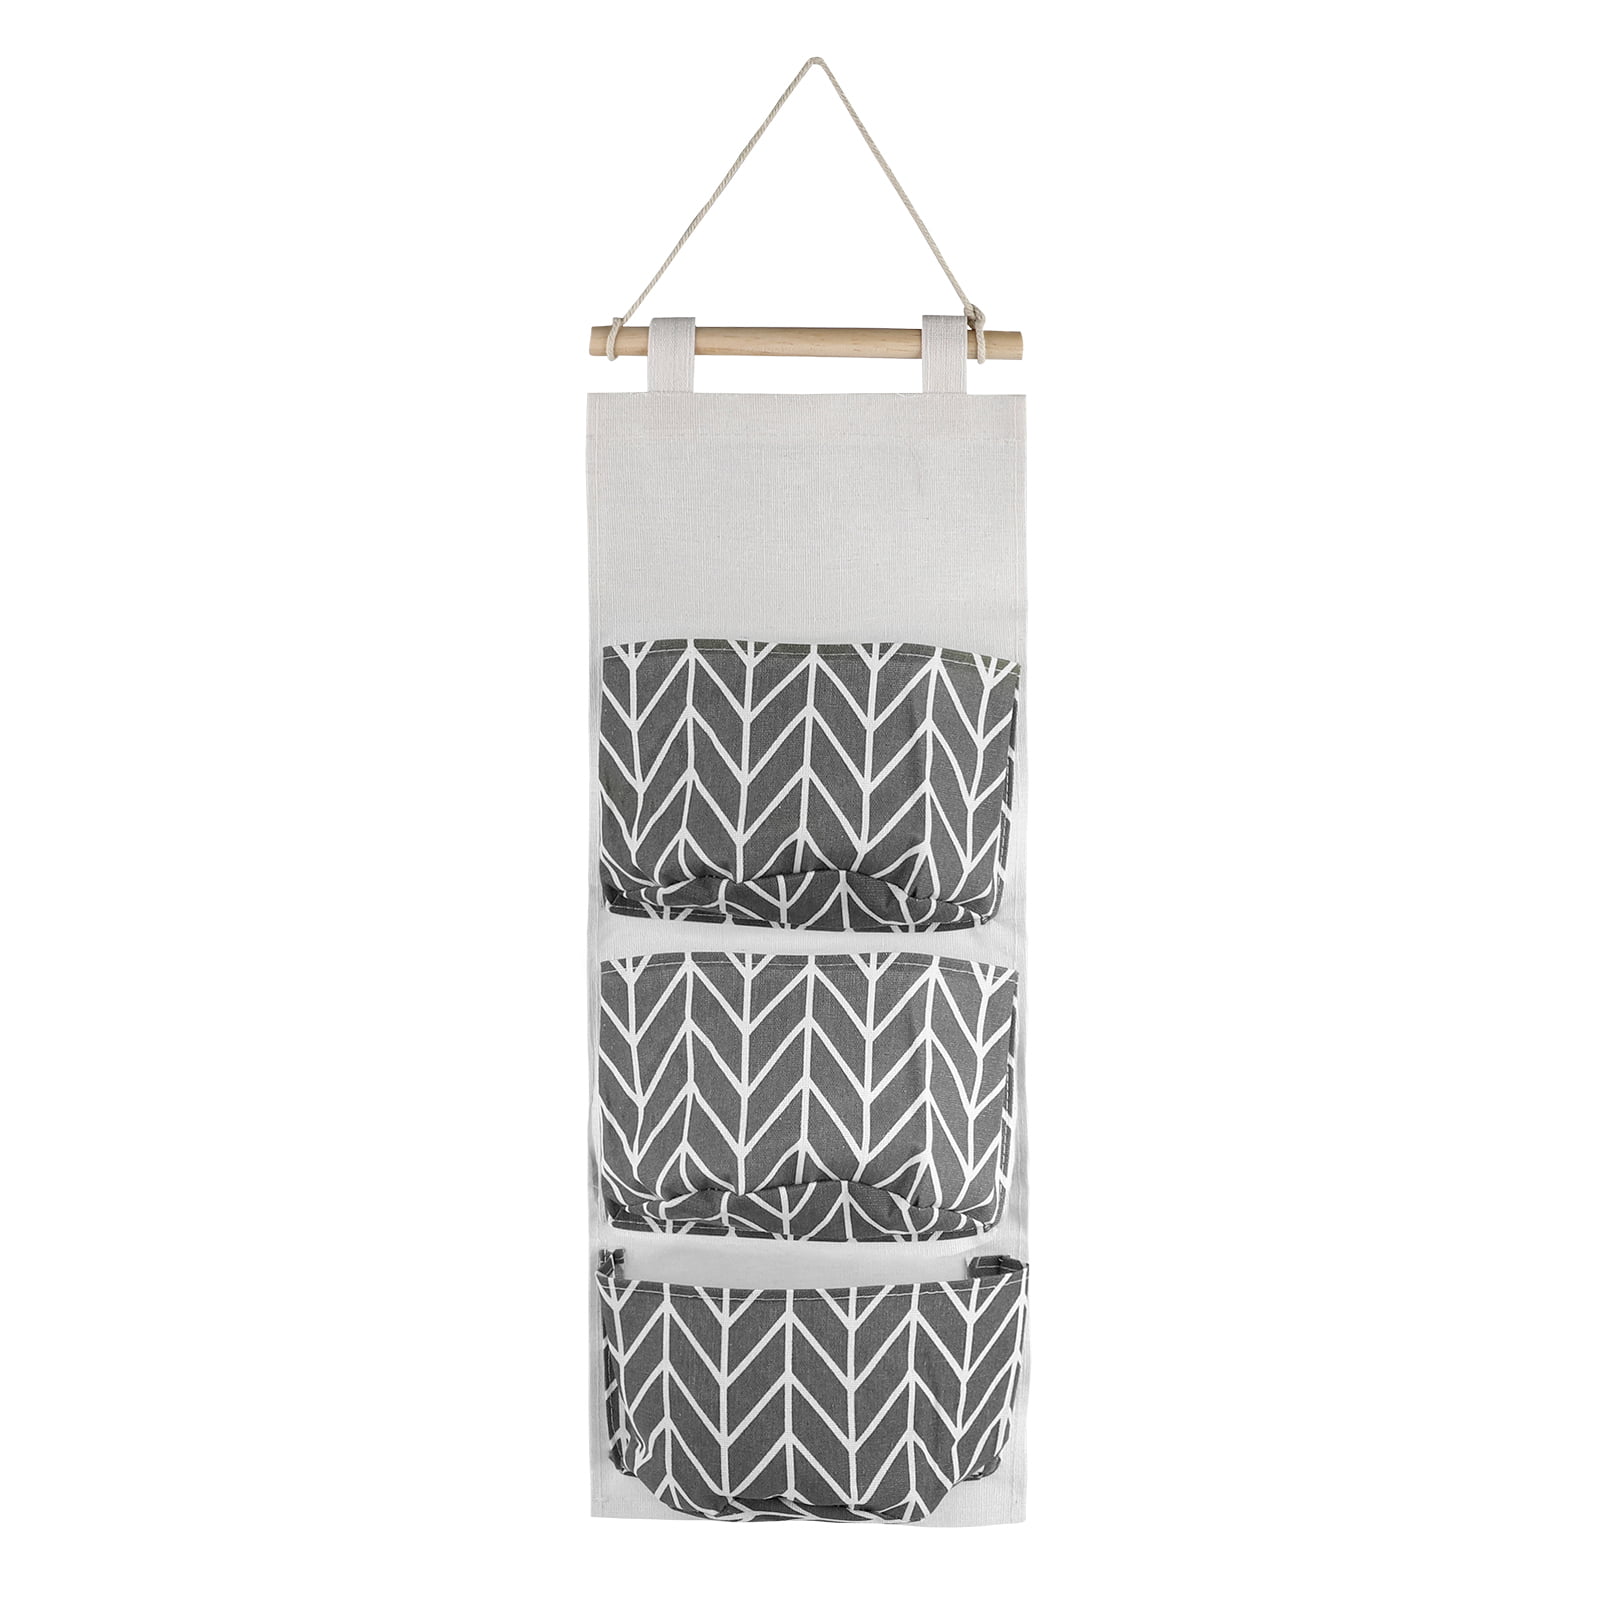 Hanging Storage Bag with 3 Pockets Over The Wall Door Organizer for Room Bathroom Beige 